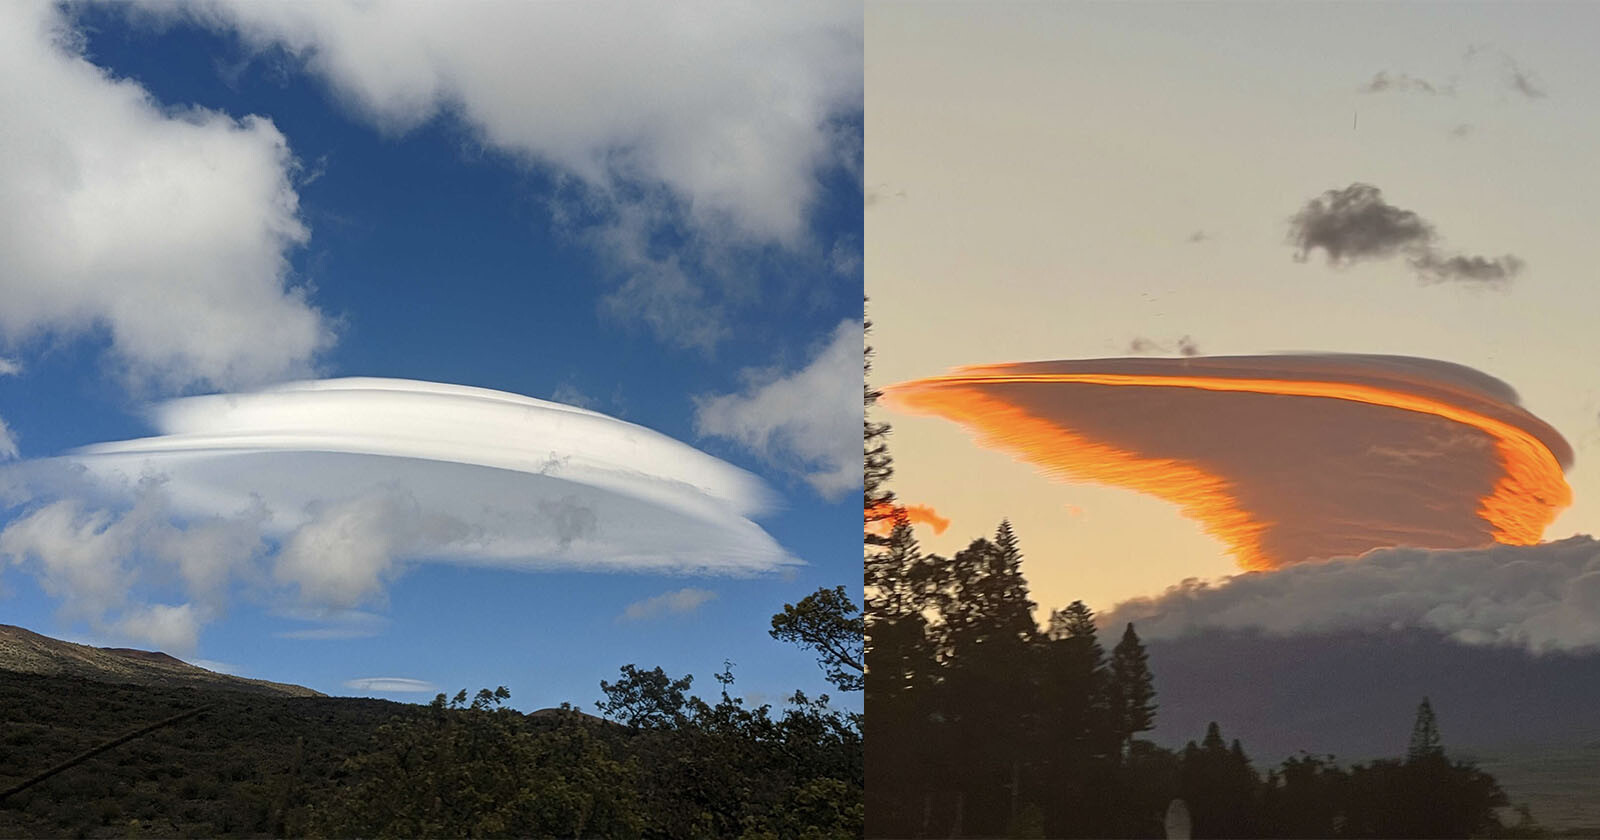 UFO-Shaped Clouds Photographed in Hawaii